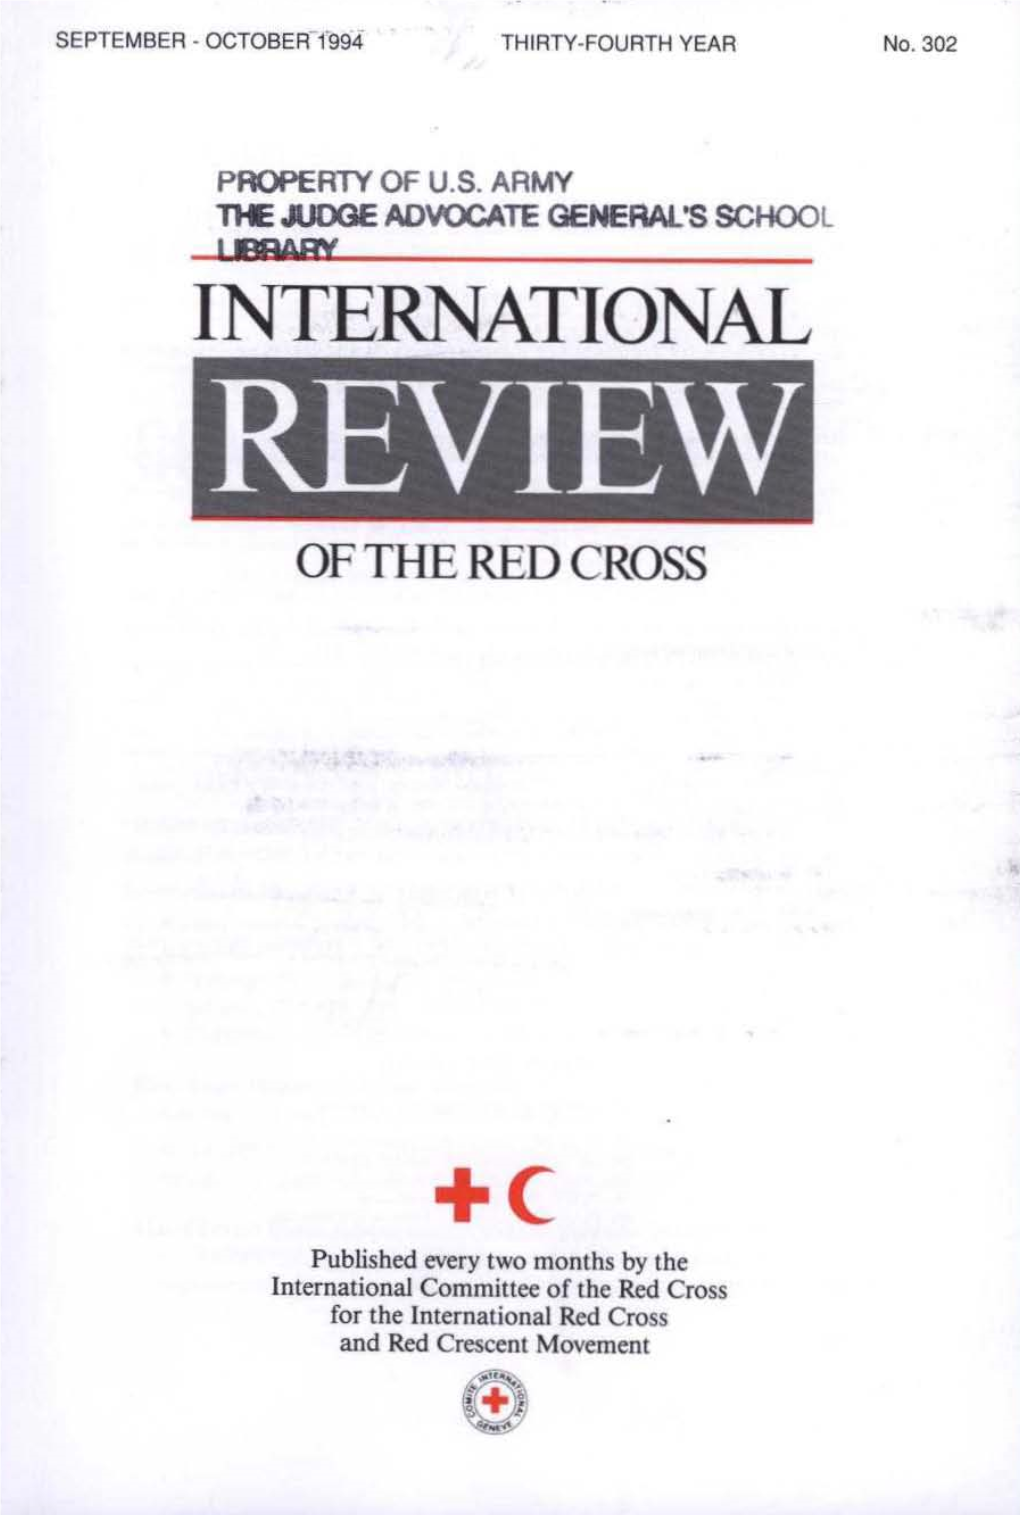 Of the Red Cross